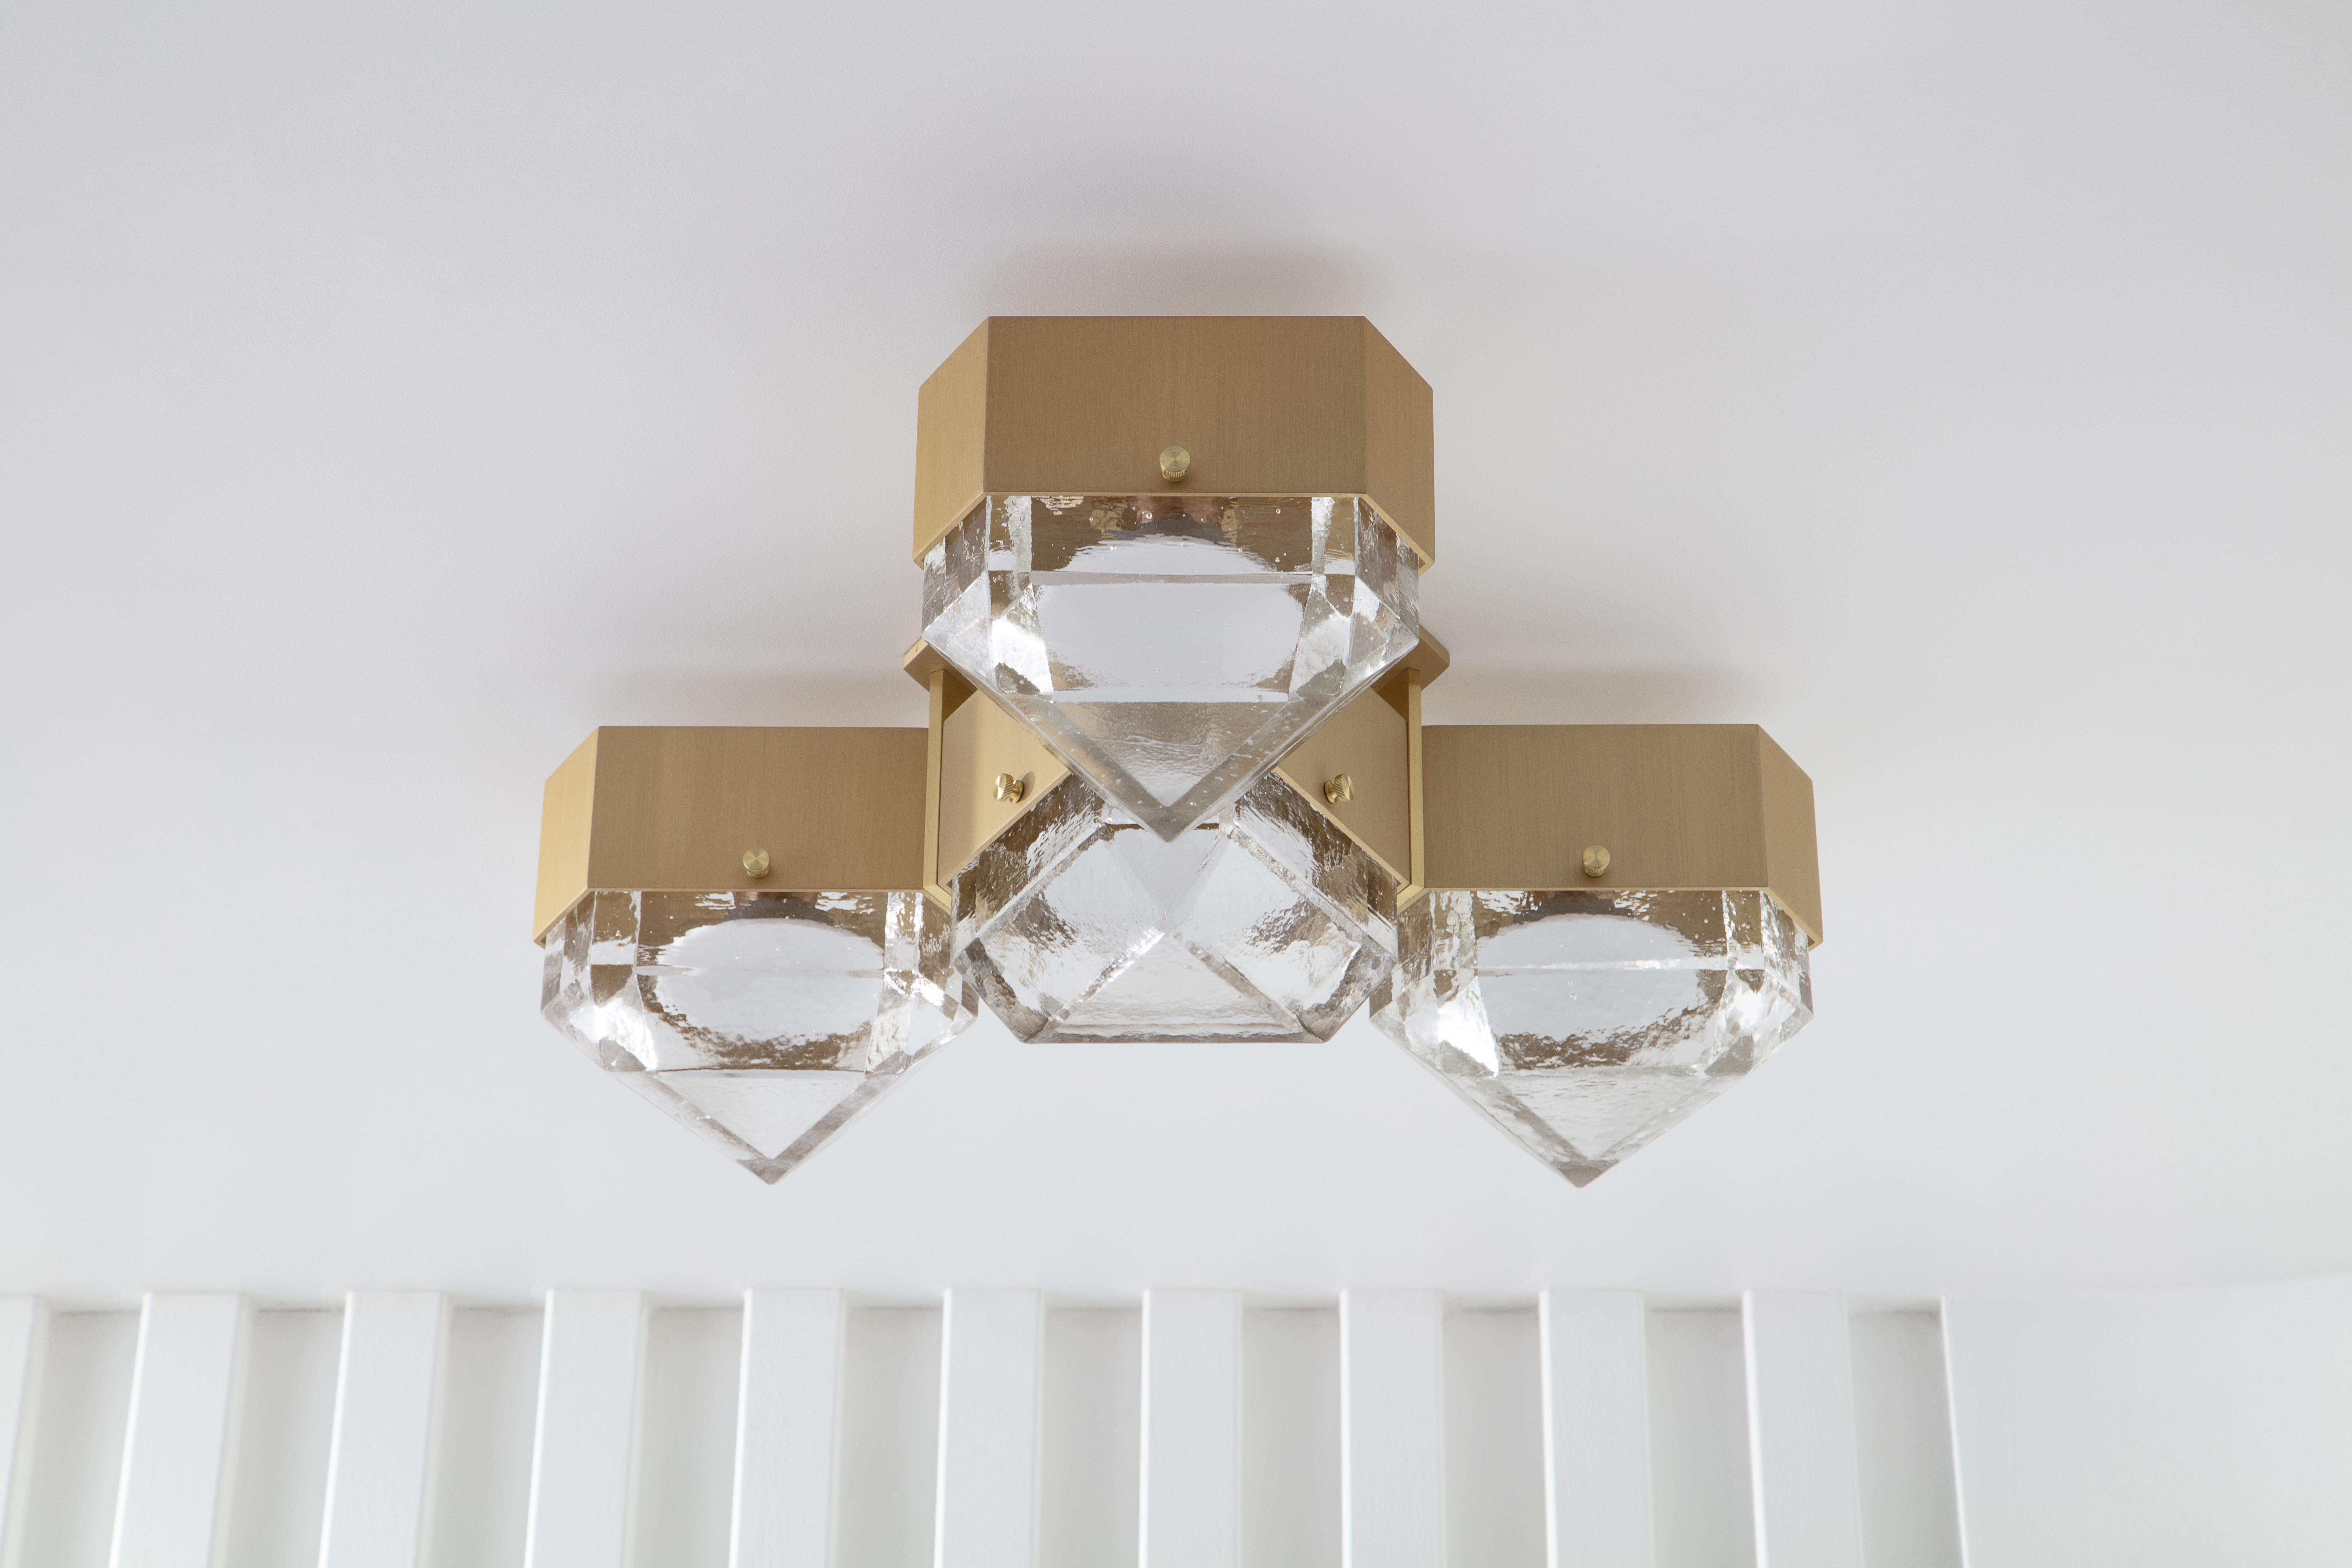 Vega is a geometric, modular, contemporary lighting fixture. The body is made from extruded aluminum with brass accents. The diffusers are available in cast glass. No external driver is necessary since Vega is outfitted with fully dimmable, warm